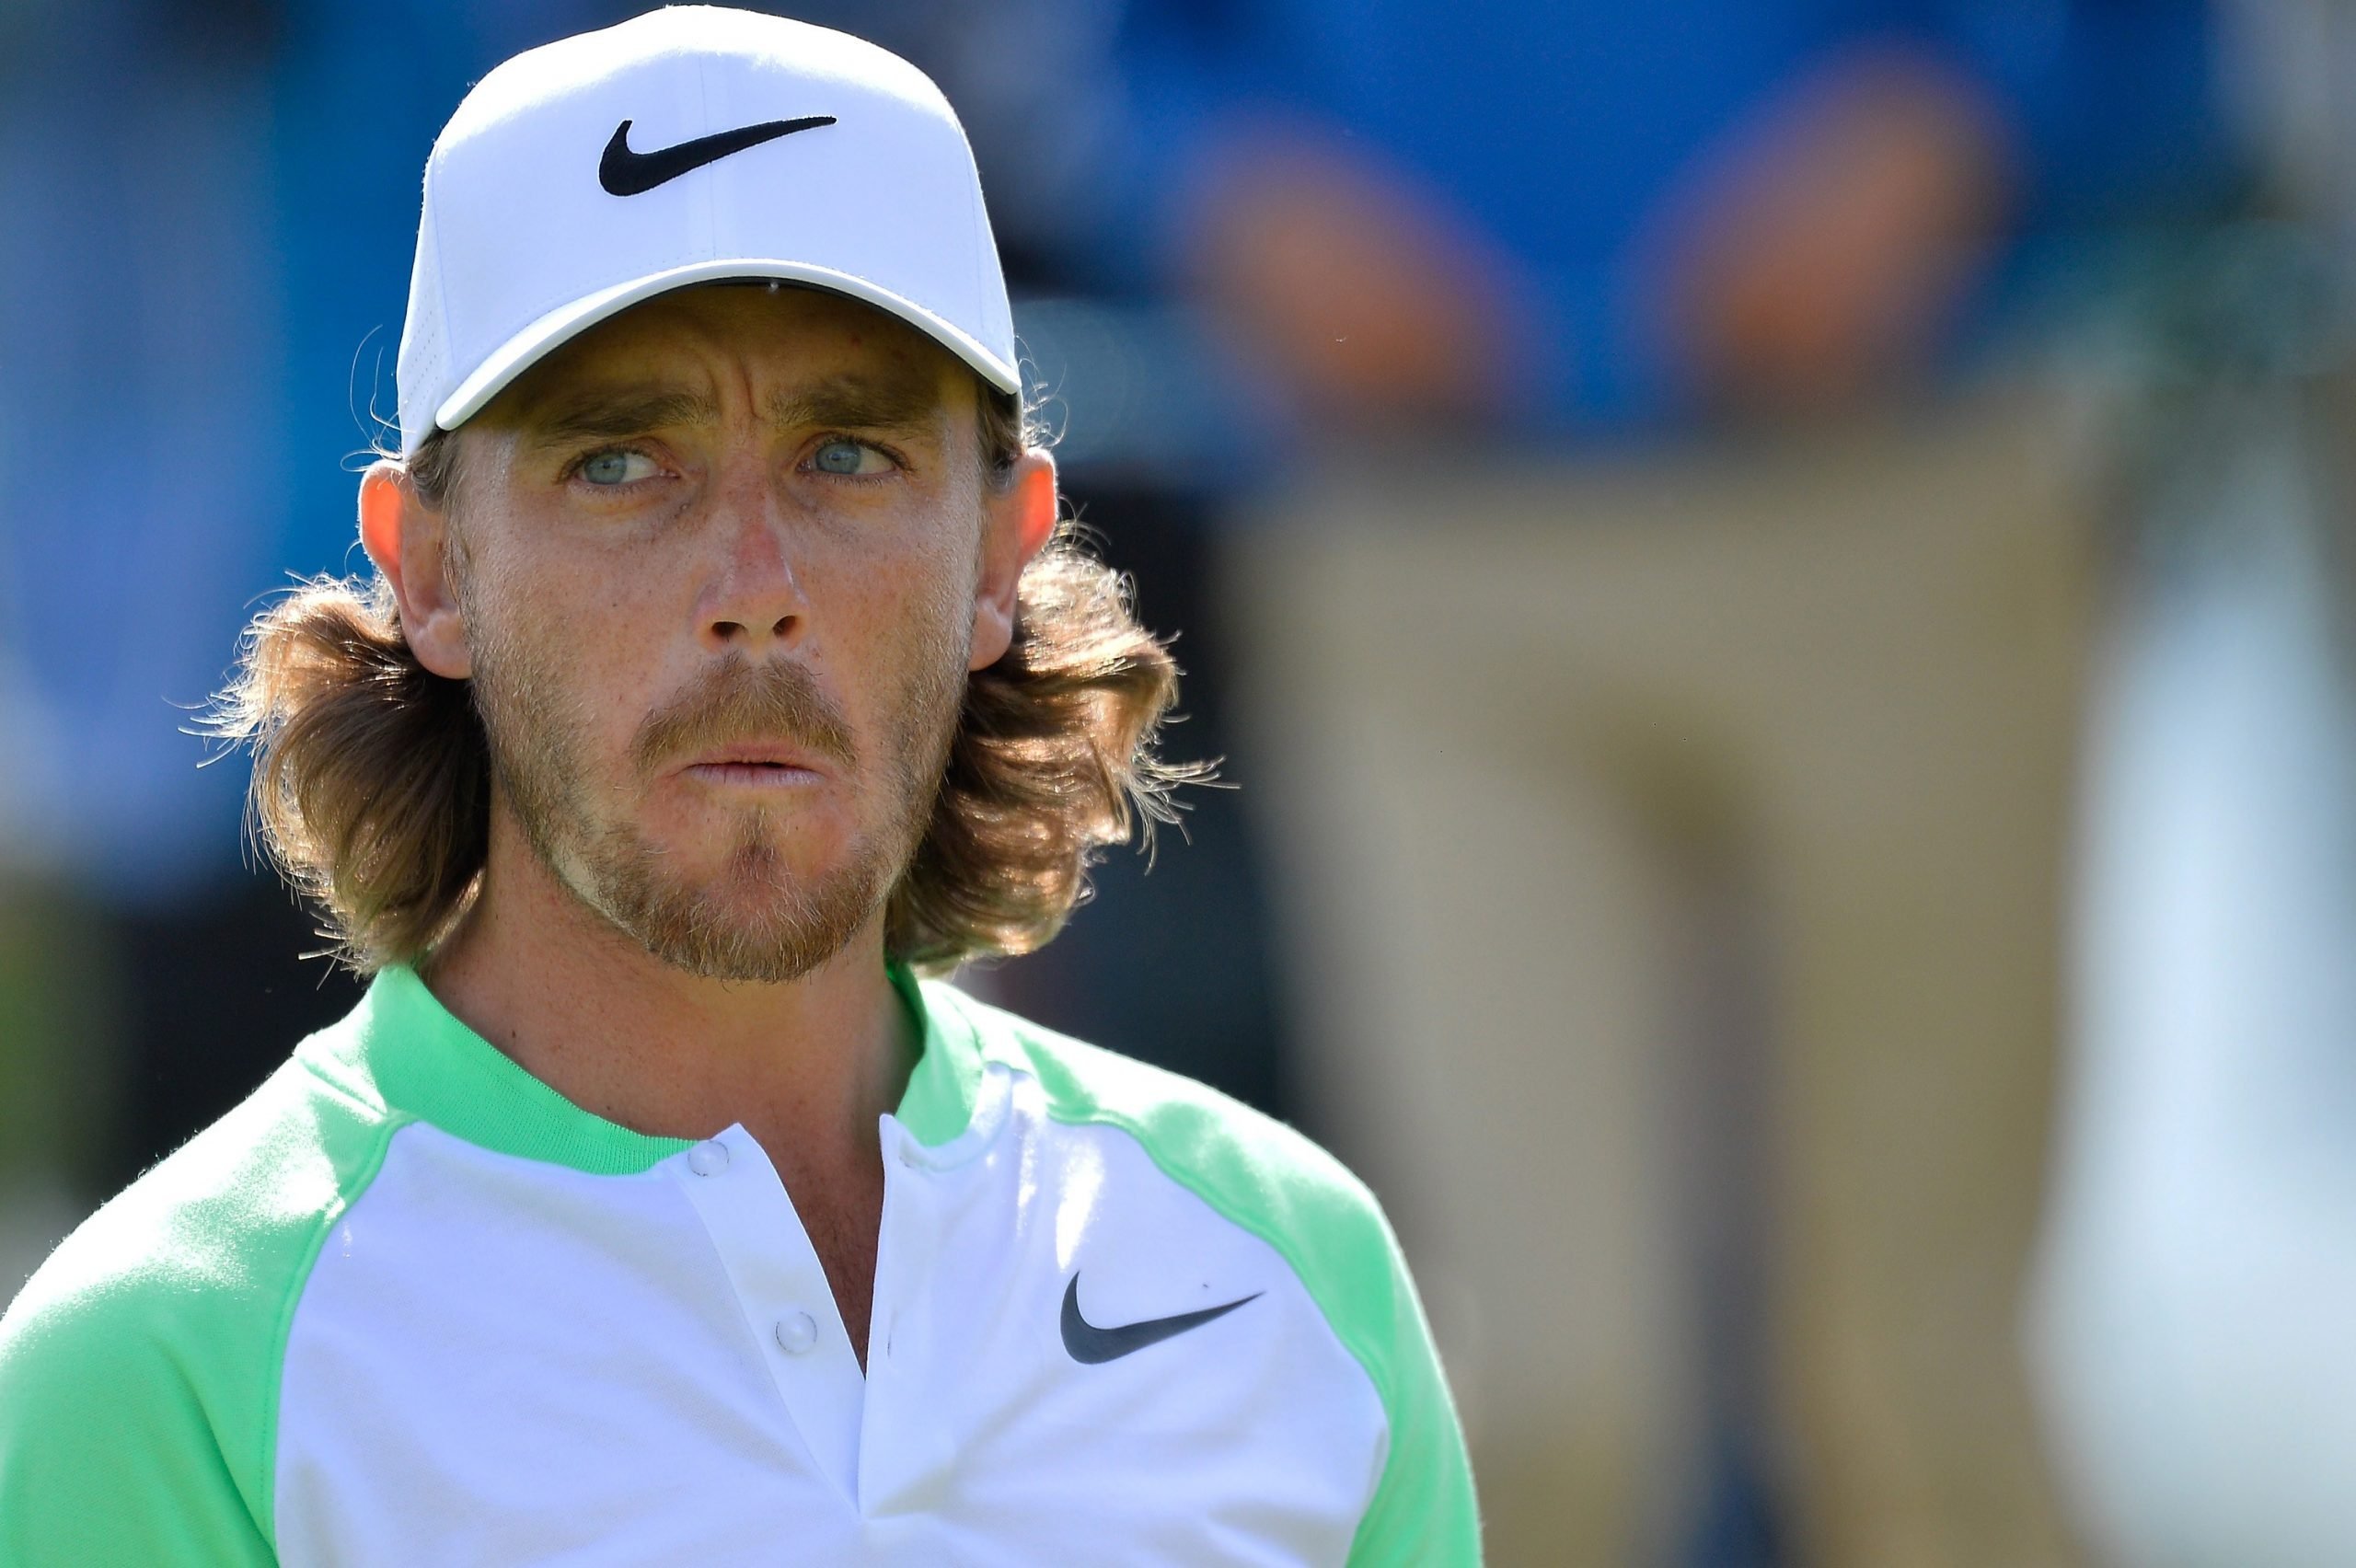 Tommy Fleetwood Open Favorite, South Africans Crowd Leaderboard